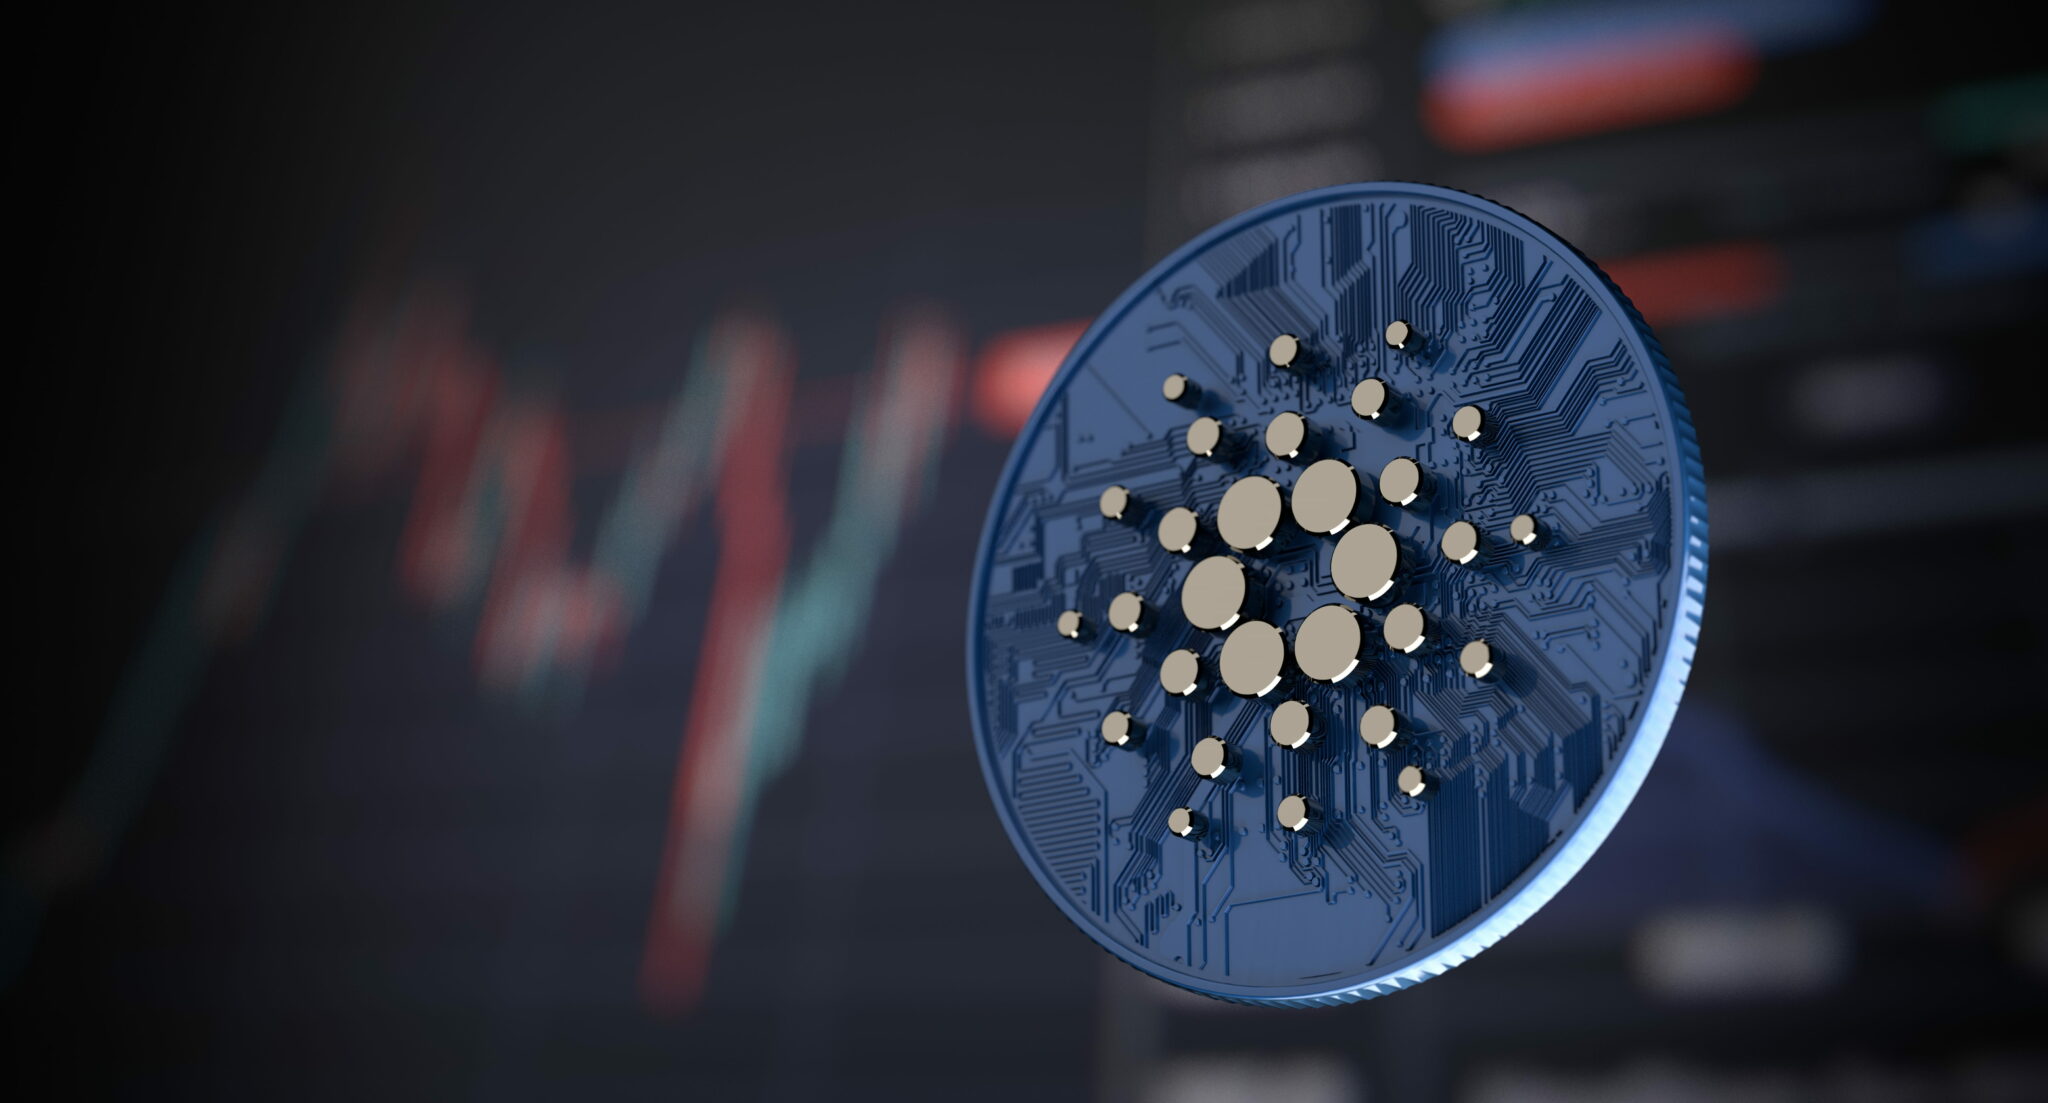 Cardano Launches New Voting Tool and Poll to Advance Governance